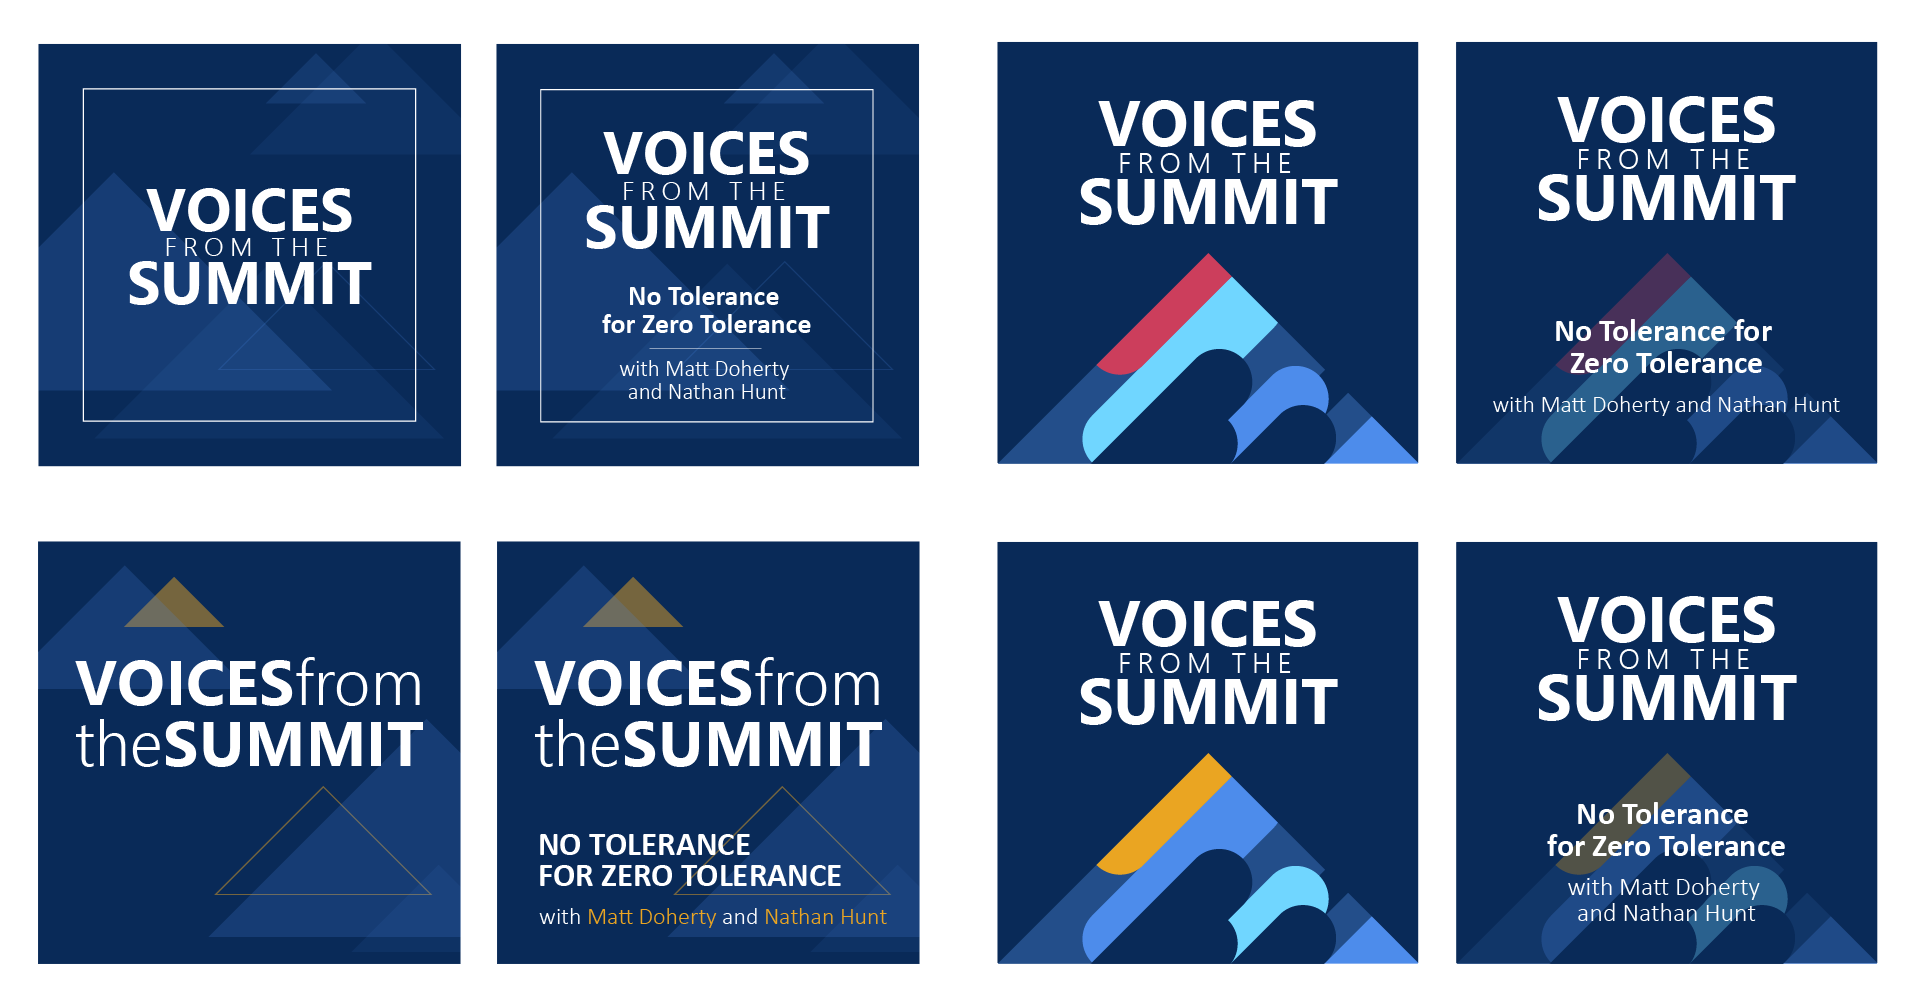 Four cover designs. Two have overlapping triangles, one all blue and the other with some yellow highlights. The other two covers each have a mountain made up of colorful oblong shapes; one has a red summit, and the other has a yellow summit.